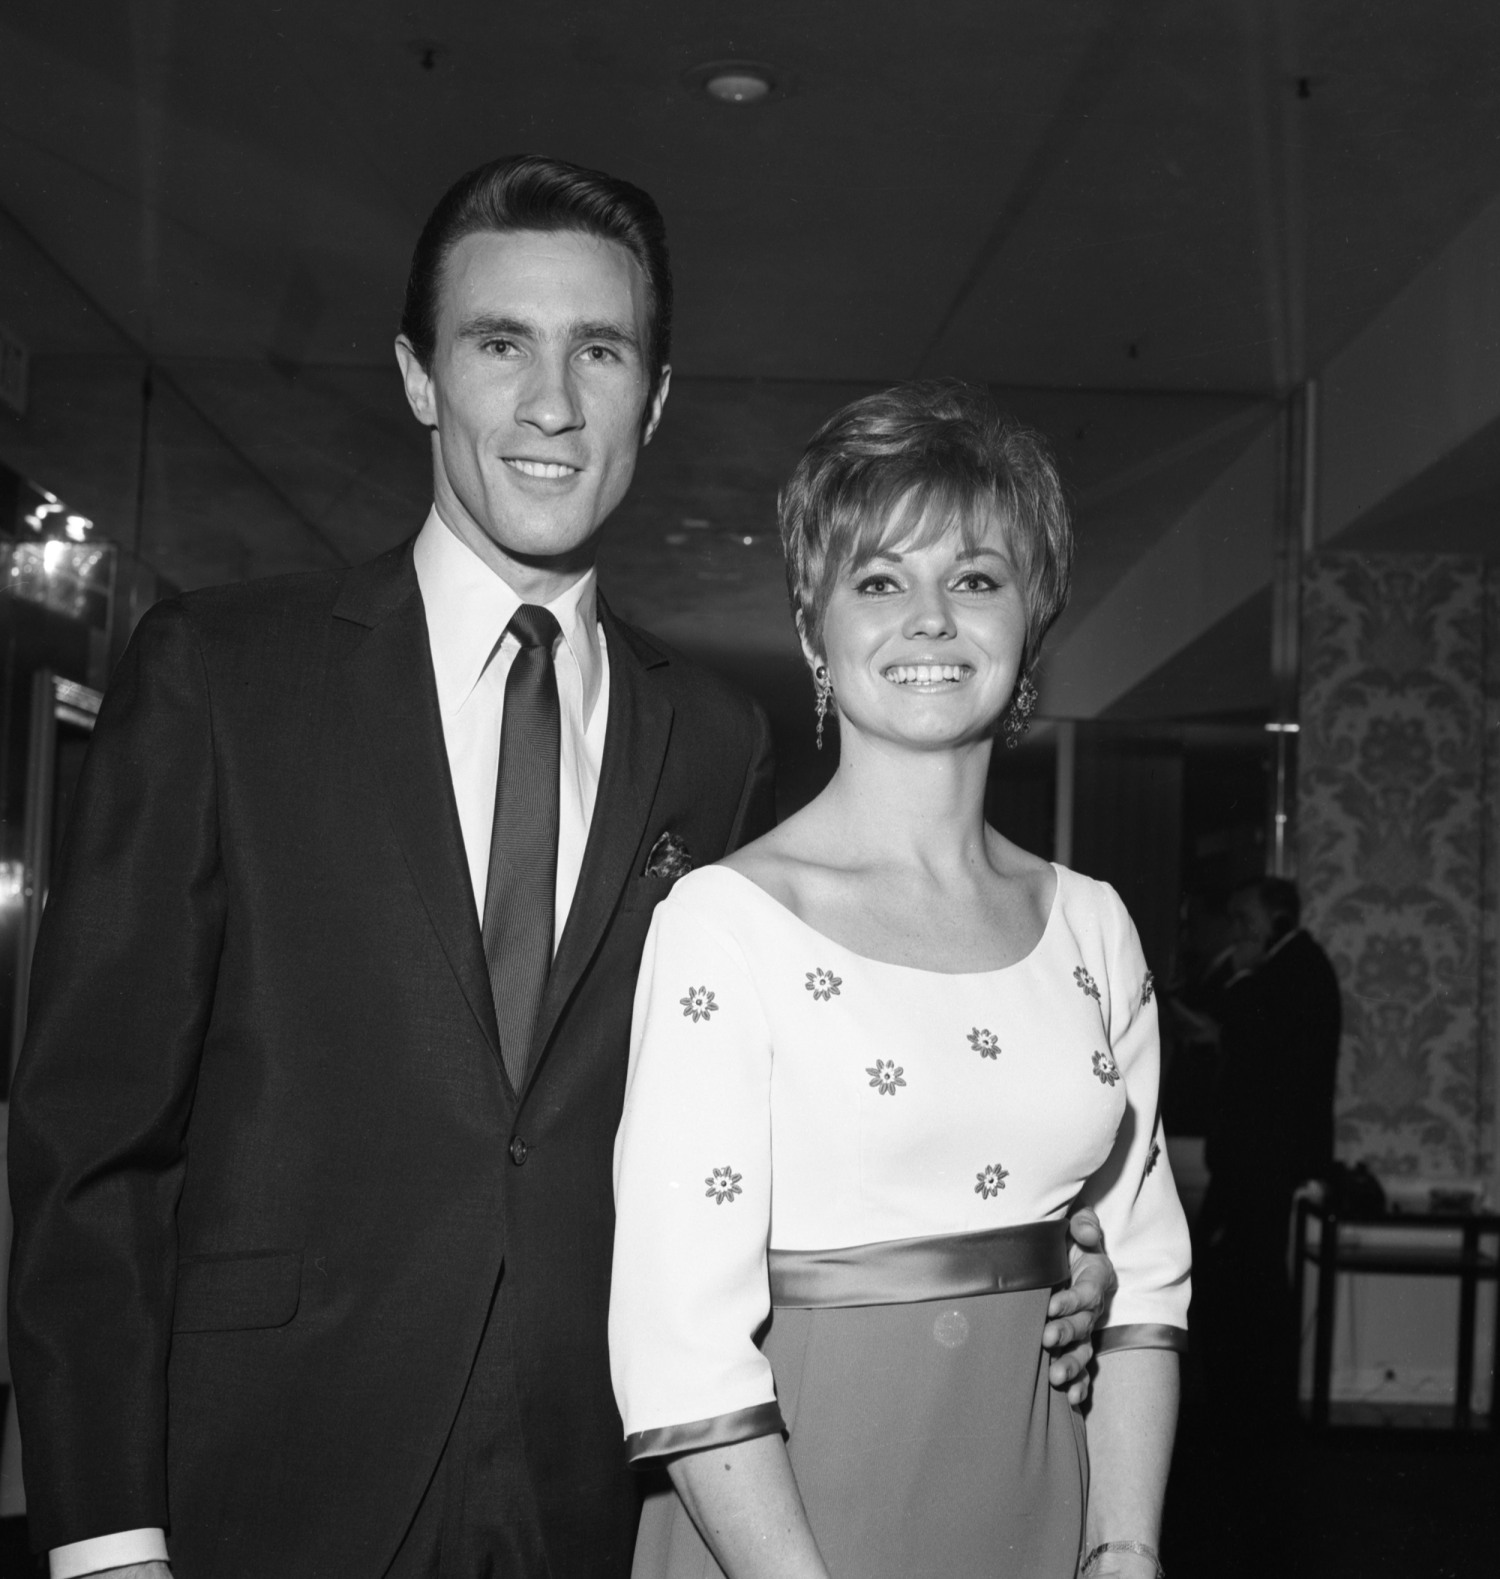 Murder of Righteous Brothers Singers Ex-Wife Karen Klaas Solved 40 Years Later pic